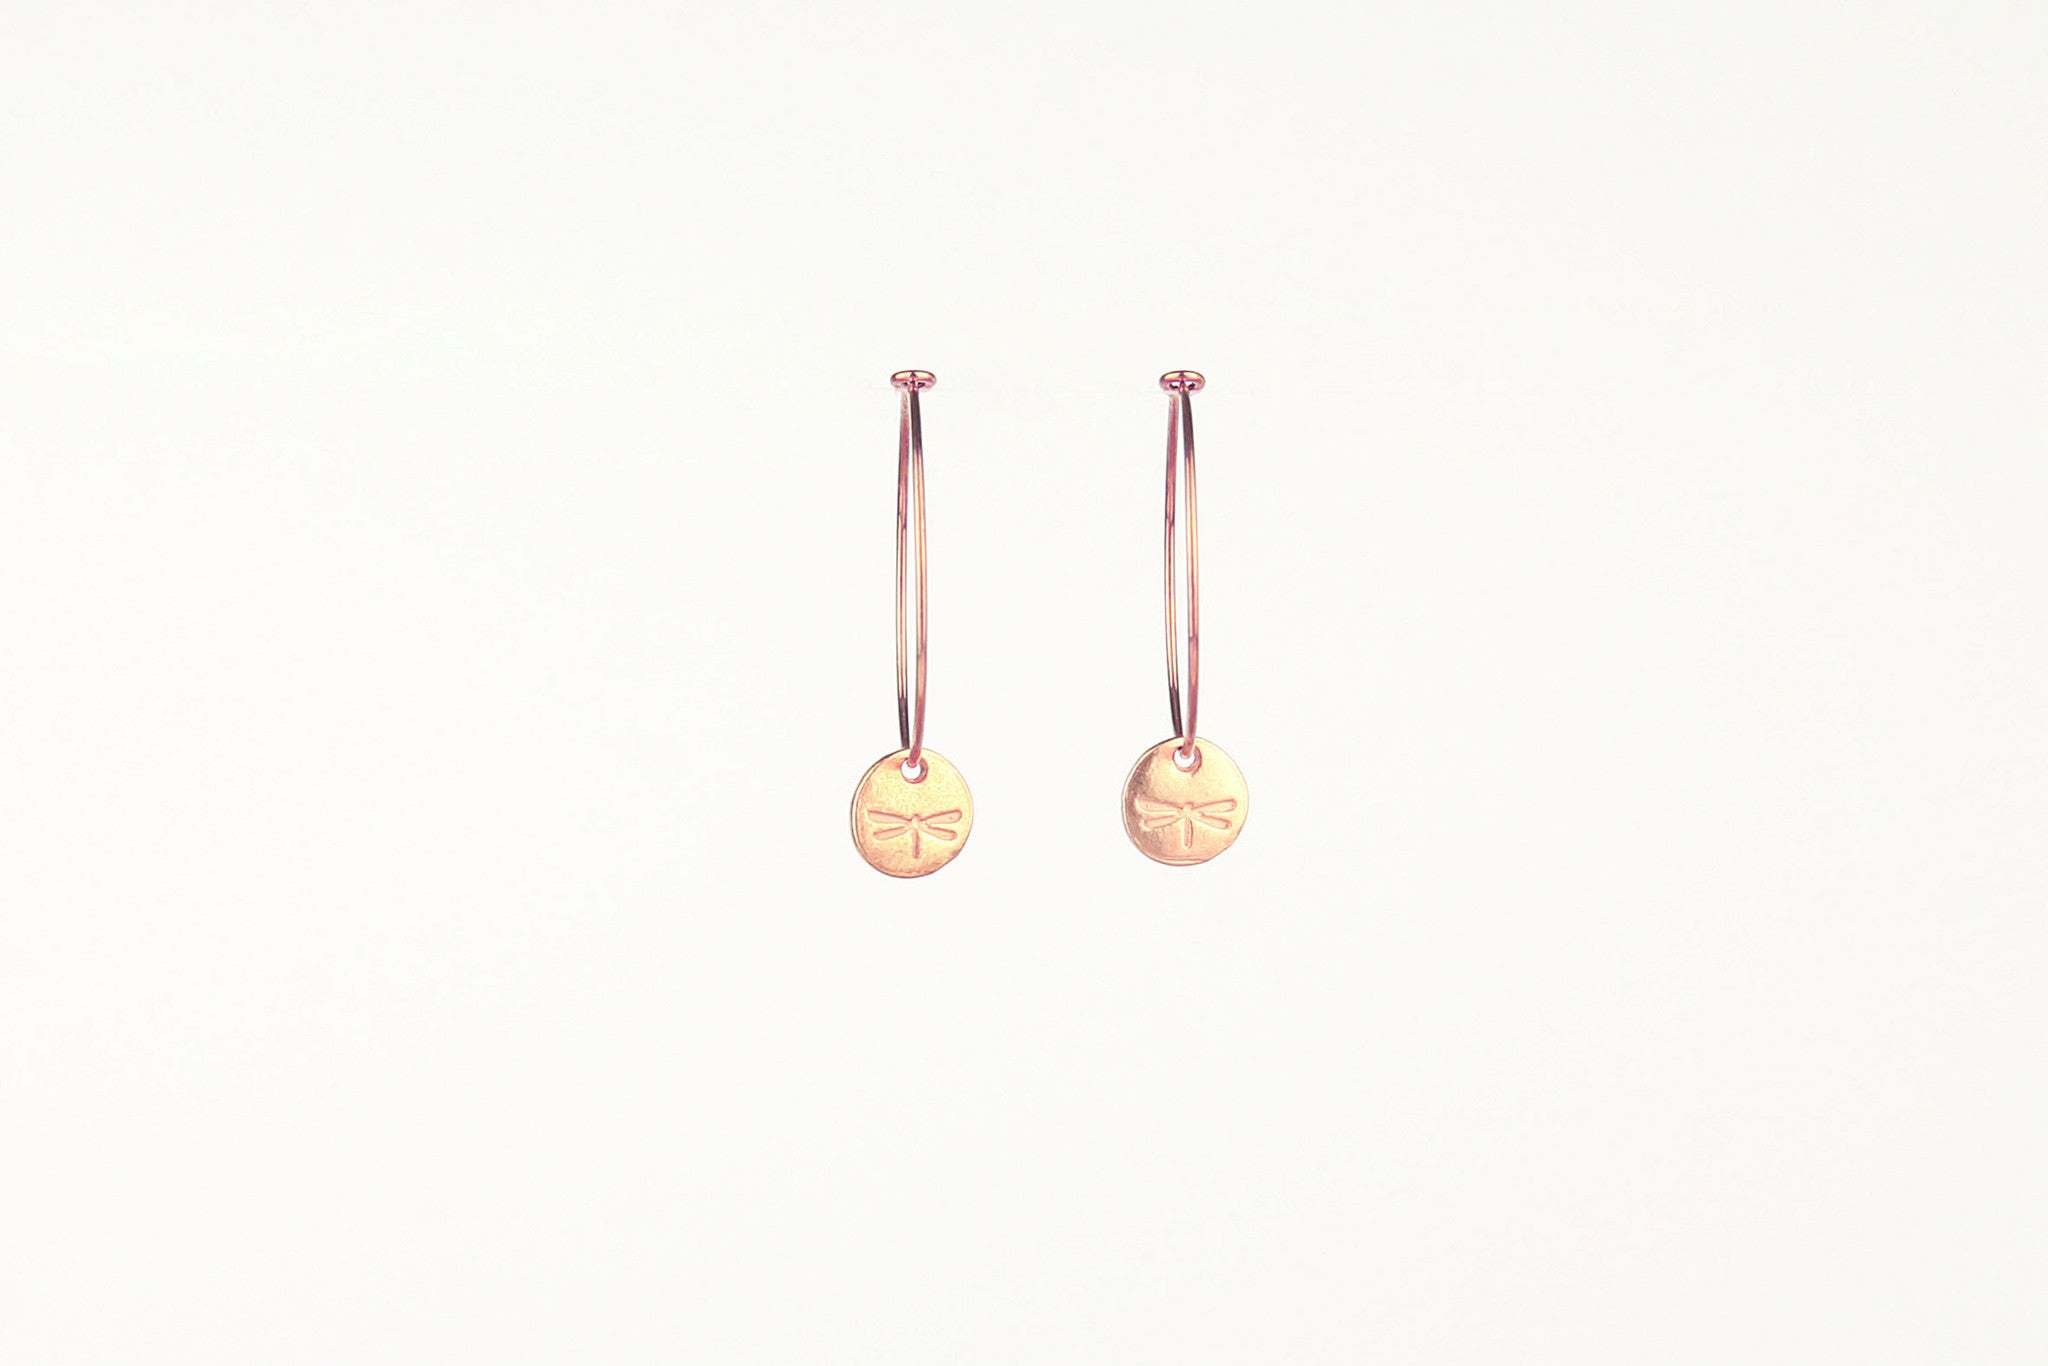 jewelberry ohrringe earrings dragonfly token hoops rose gold plated sterling silver fine jewelry handmade with love fairtrade